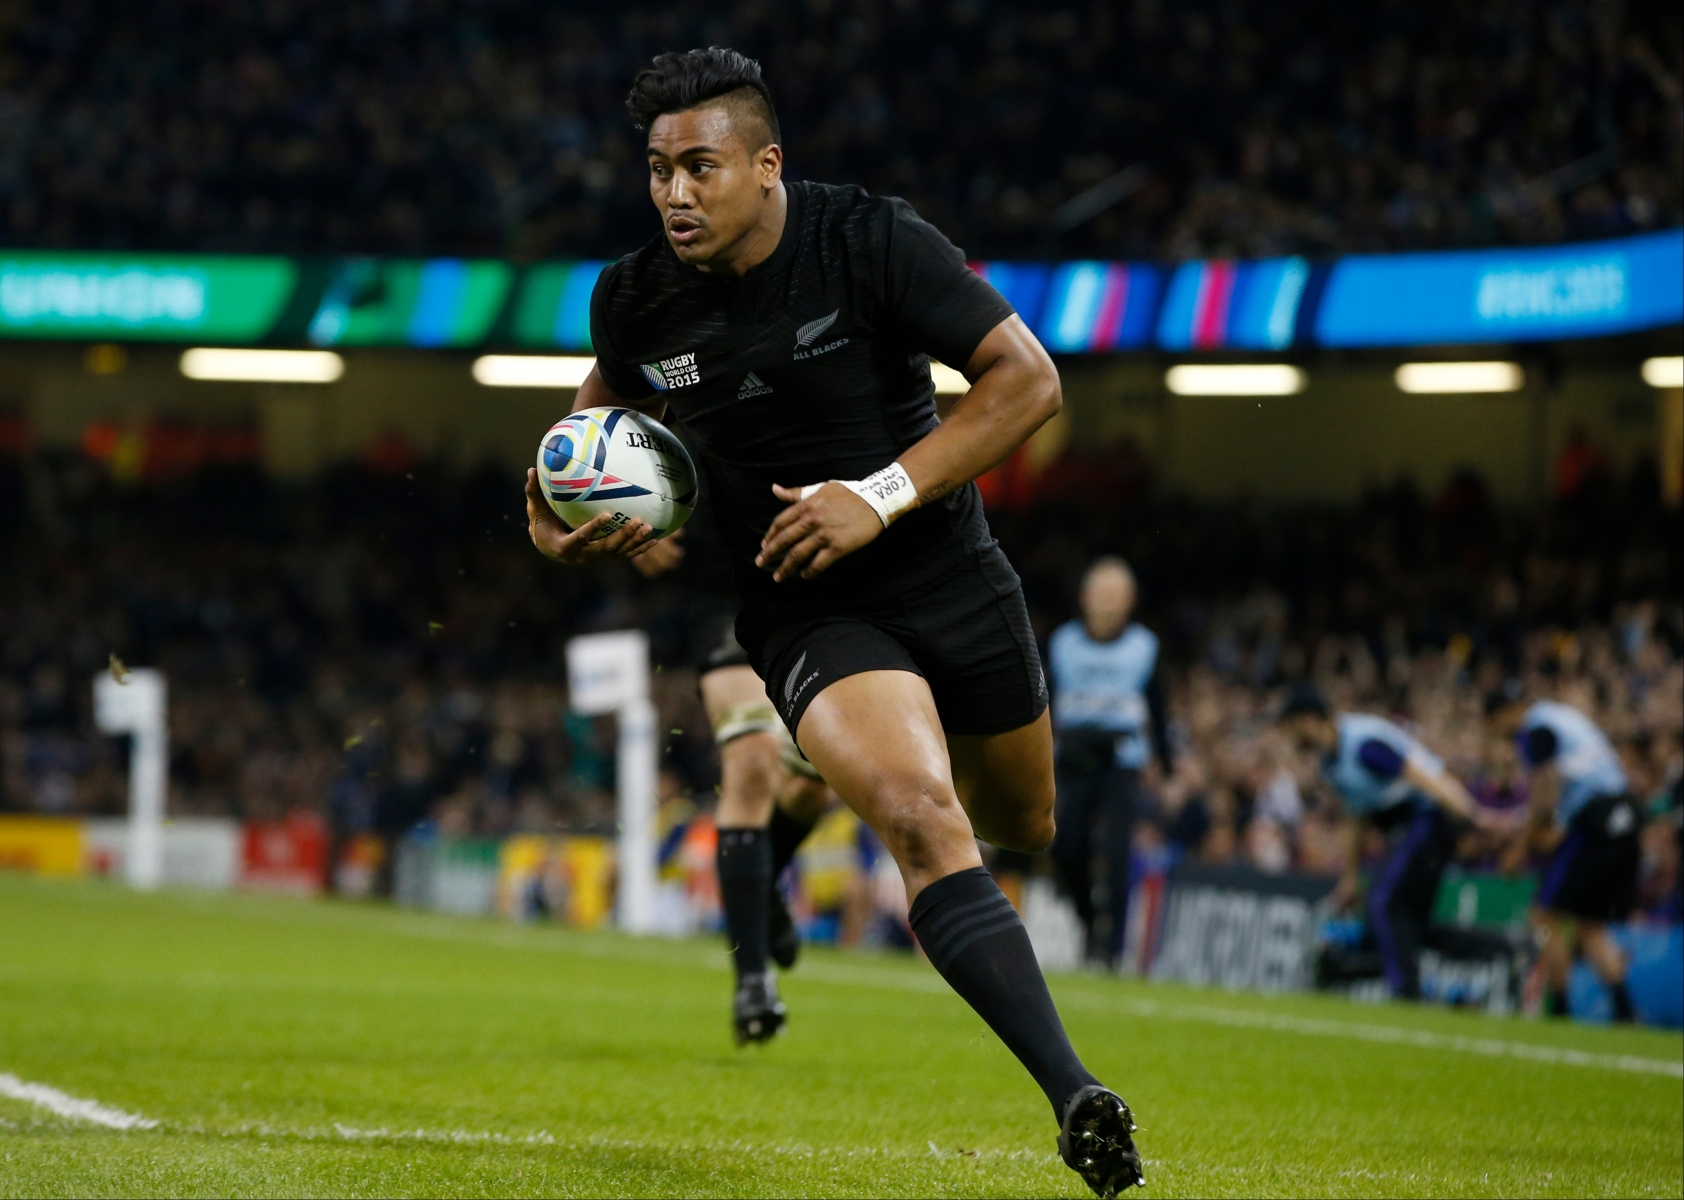 FILE - In this file photo dated Saturday, Oct. 17, 2015, New Zealand's Julian Savea scores a try during the Rugby World Cup quarterfinal match between New Zealand and France at the Millennium Stadium, Cardiff.  Stunning skill by winger Julian Savea bought an audible gasp from fans around Millennium Stadium. (AP Photo/Alastair Grant, FILE) Britain Rugby WCup Top Tries